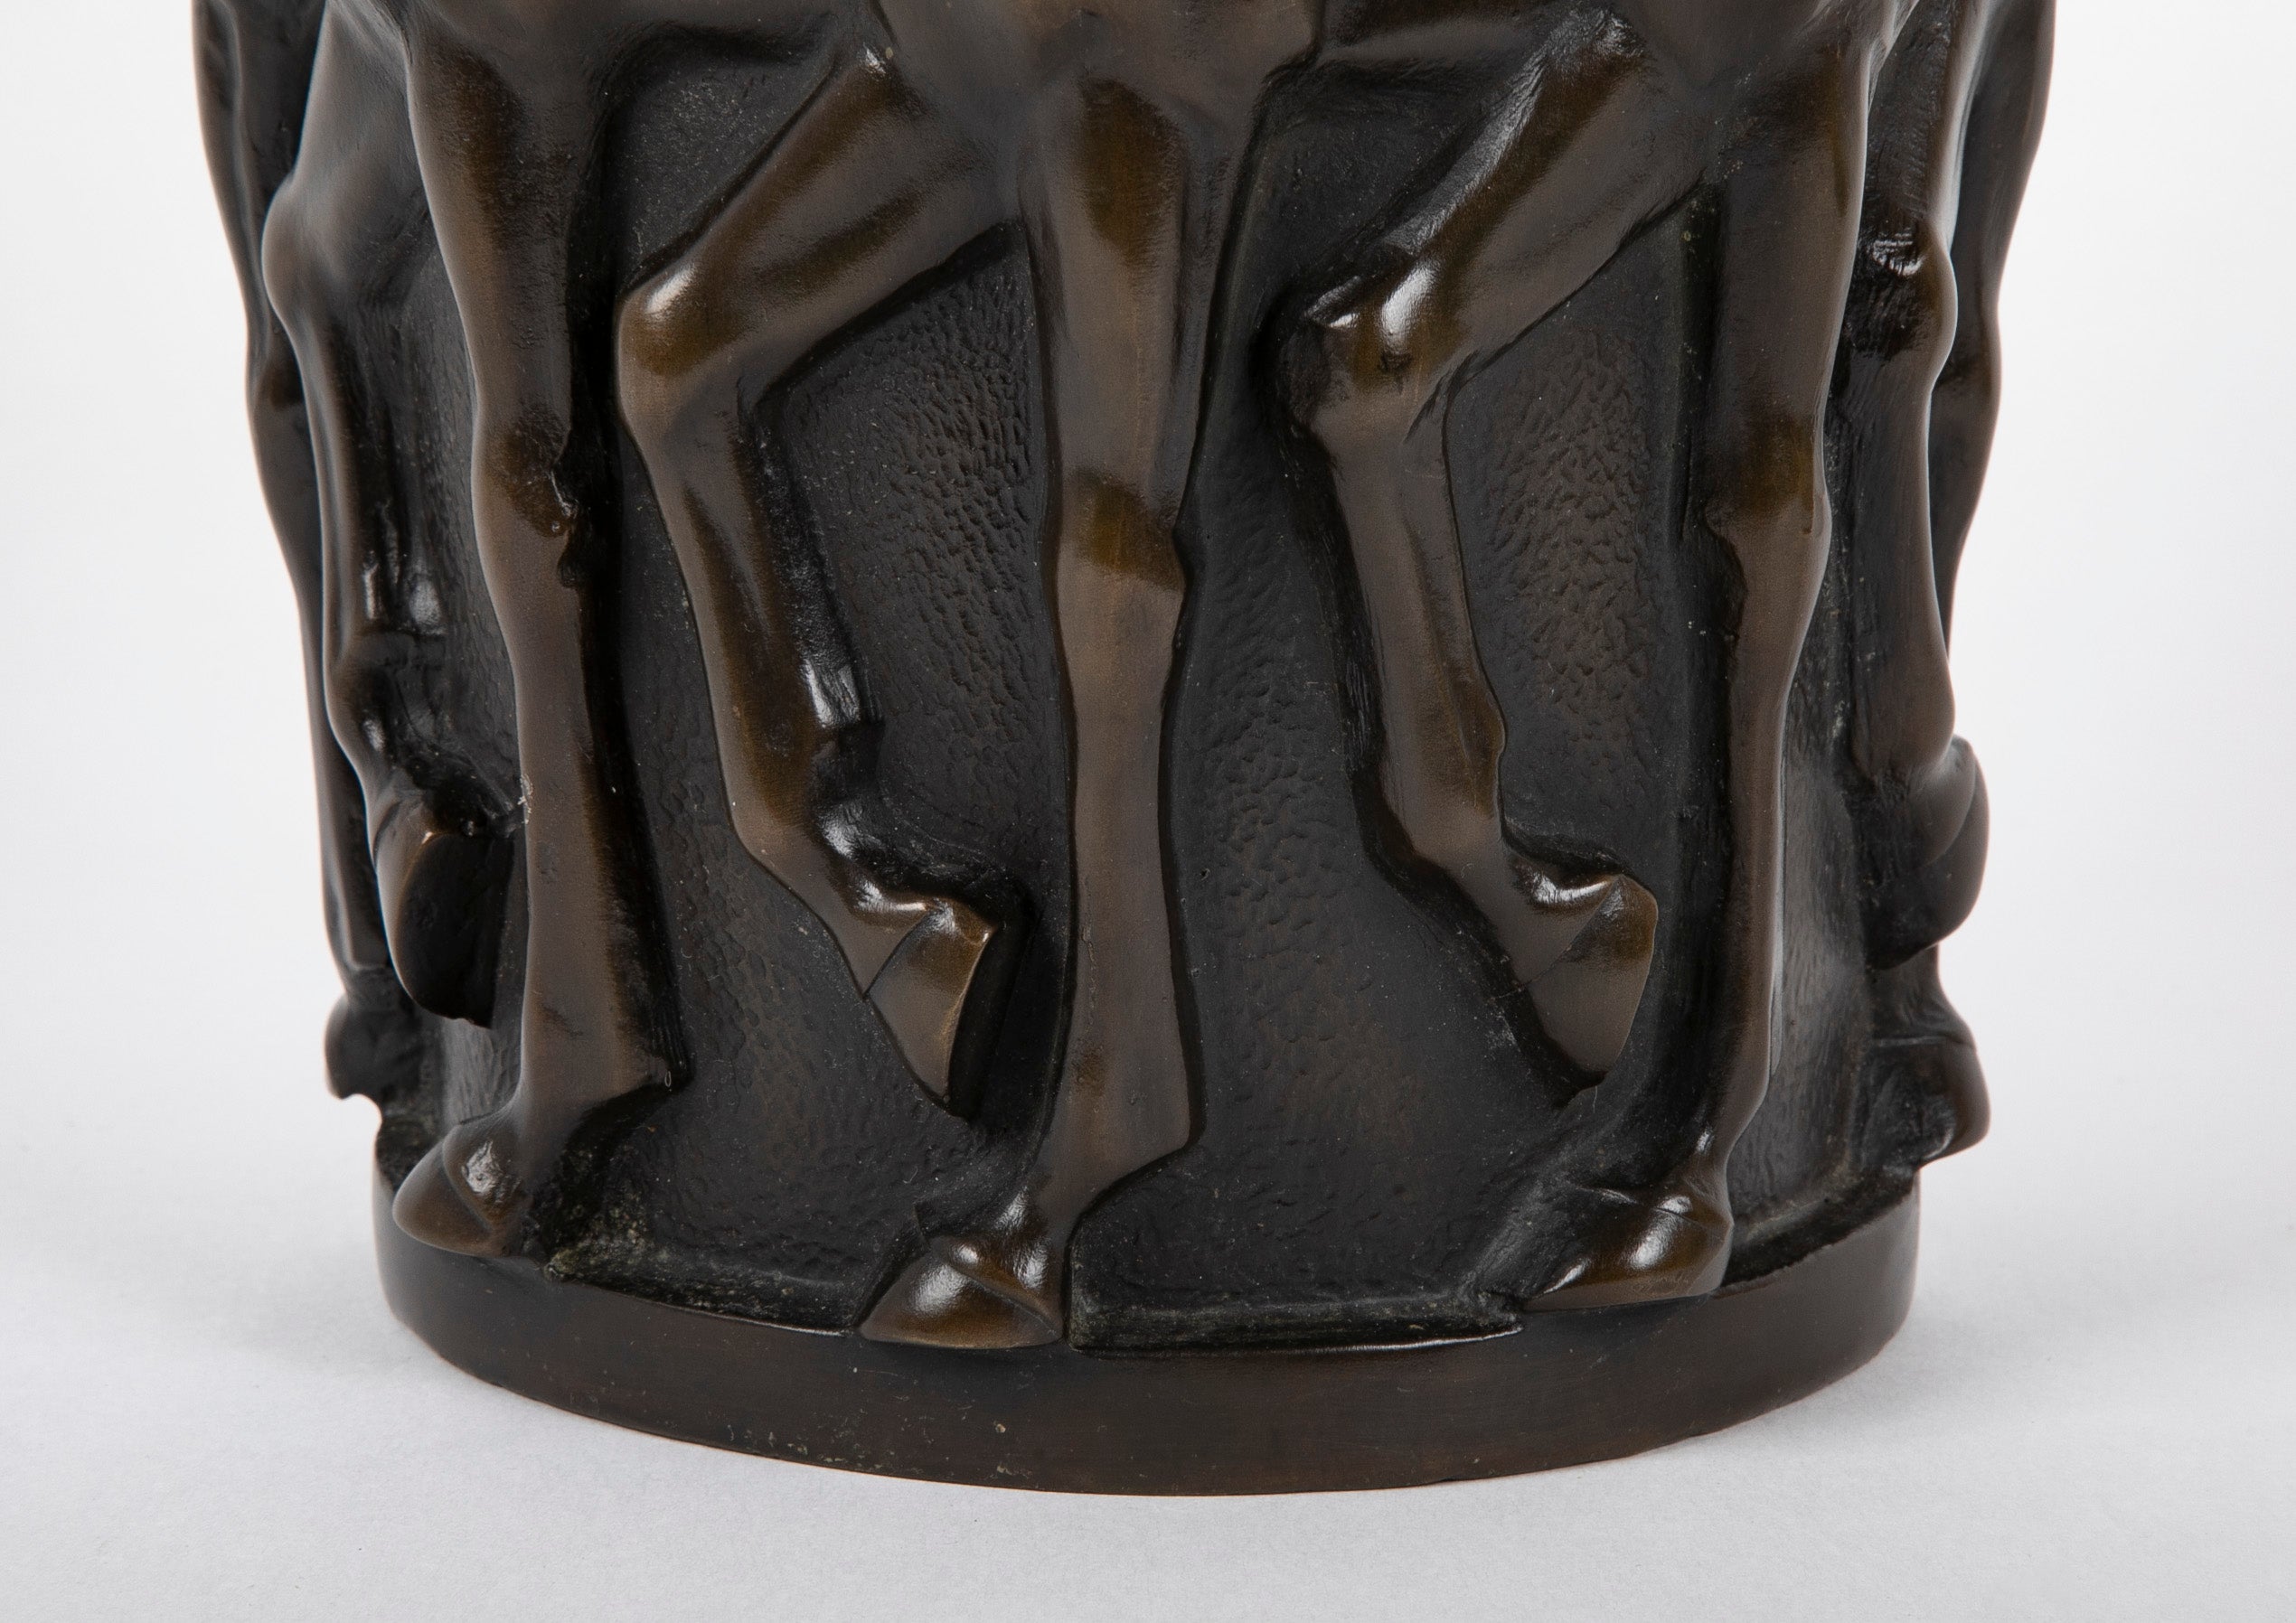 A 20th Century Bronze Molded Vase with Horses' Heads & Forequarters